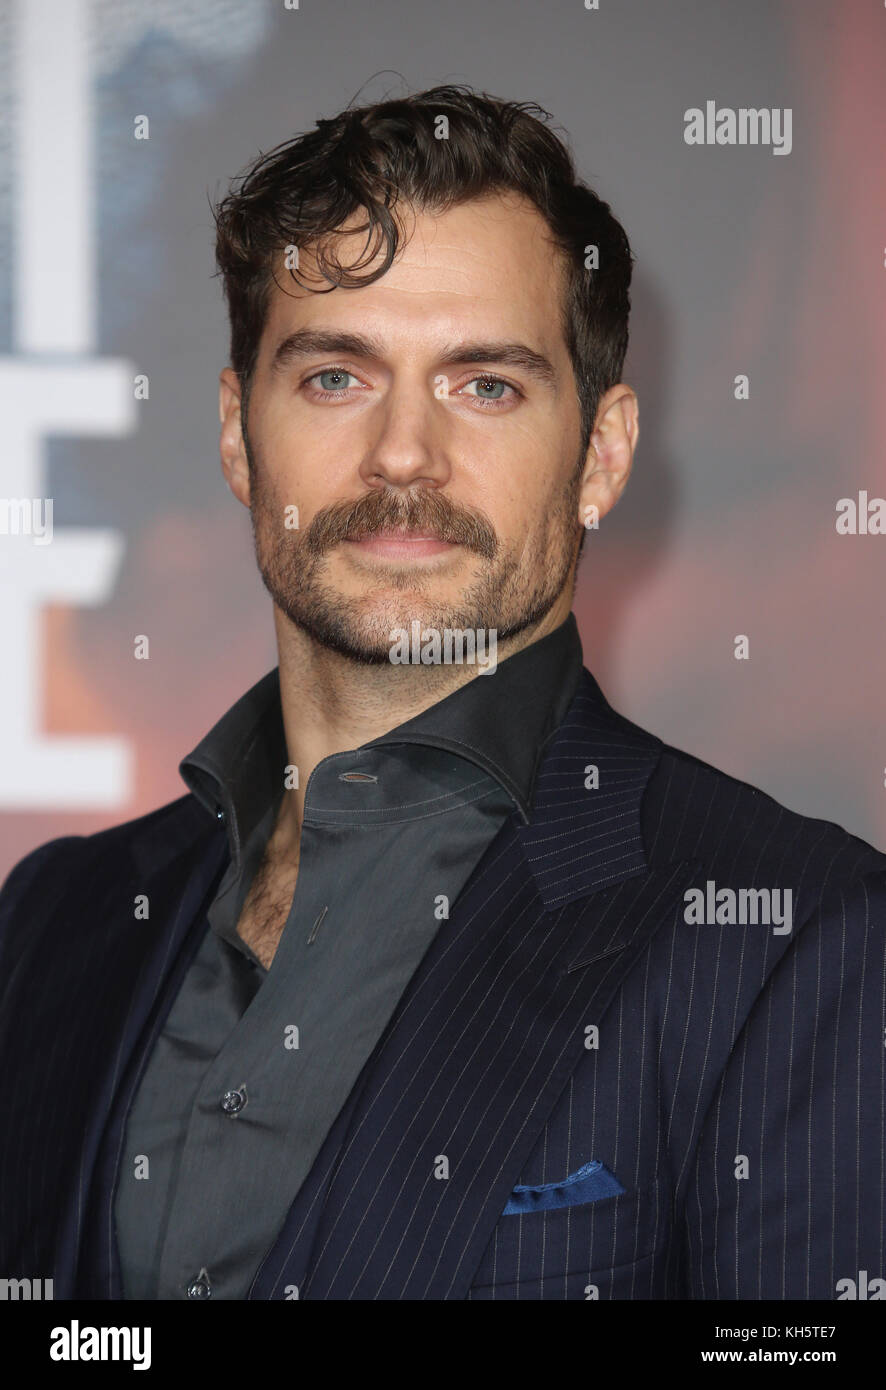 Henry Cavill brings his glamorous mother Marianne as his date to